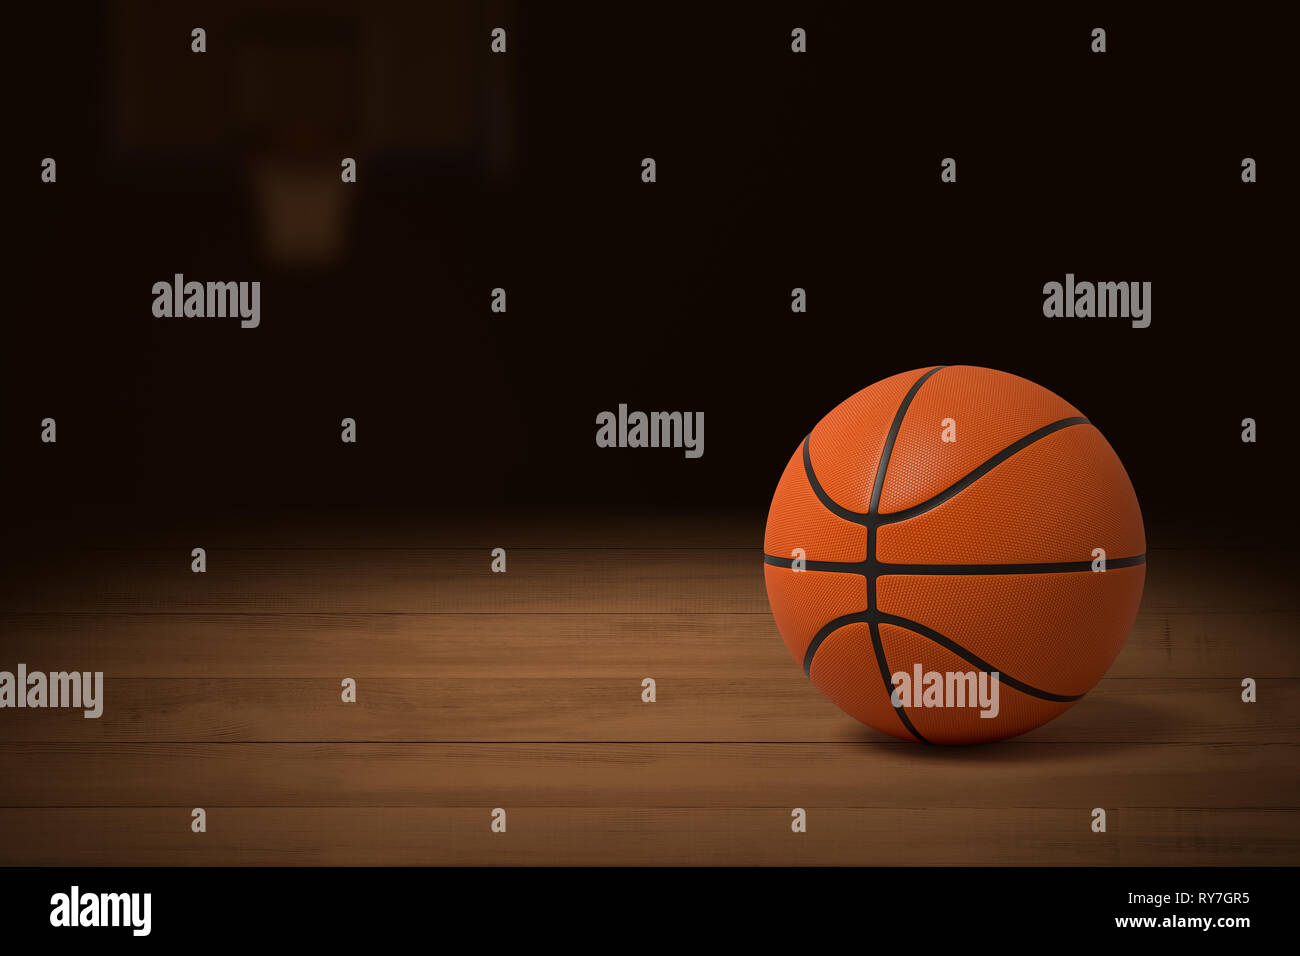 3d rendering of a basketball on the wooden floor of a dimly lit gym. Stock Photo